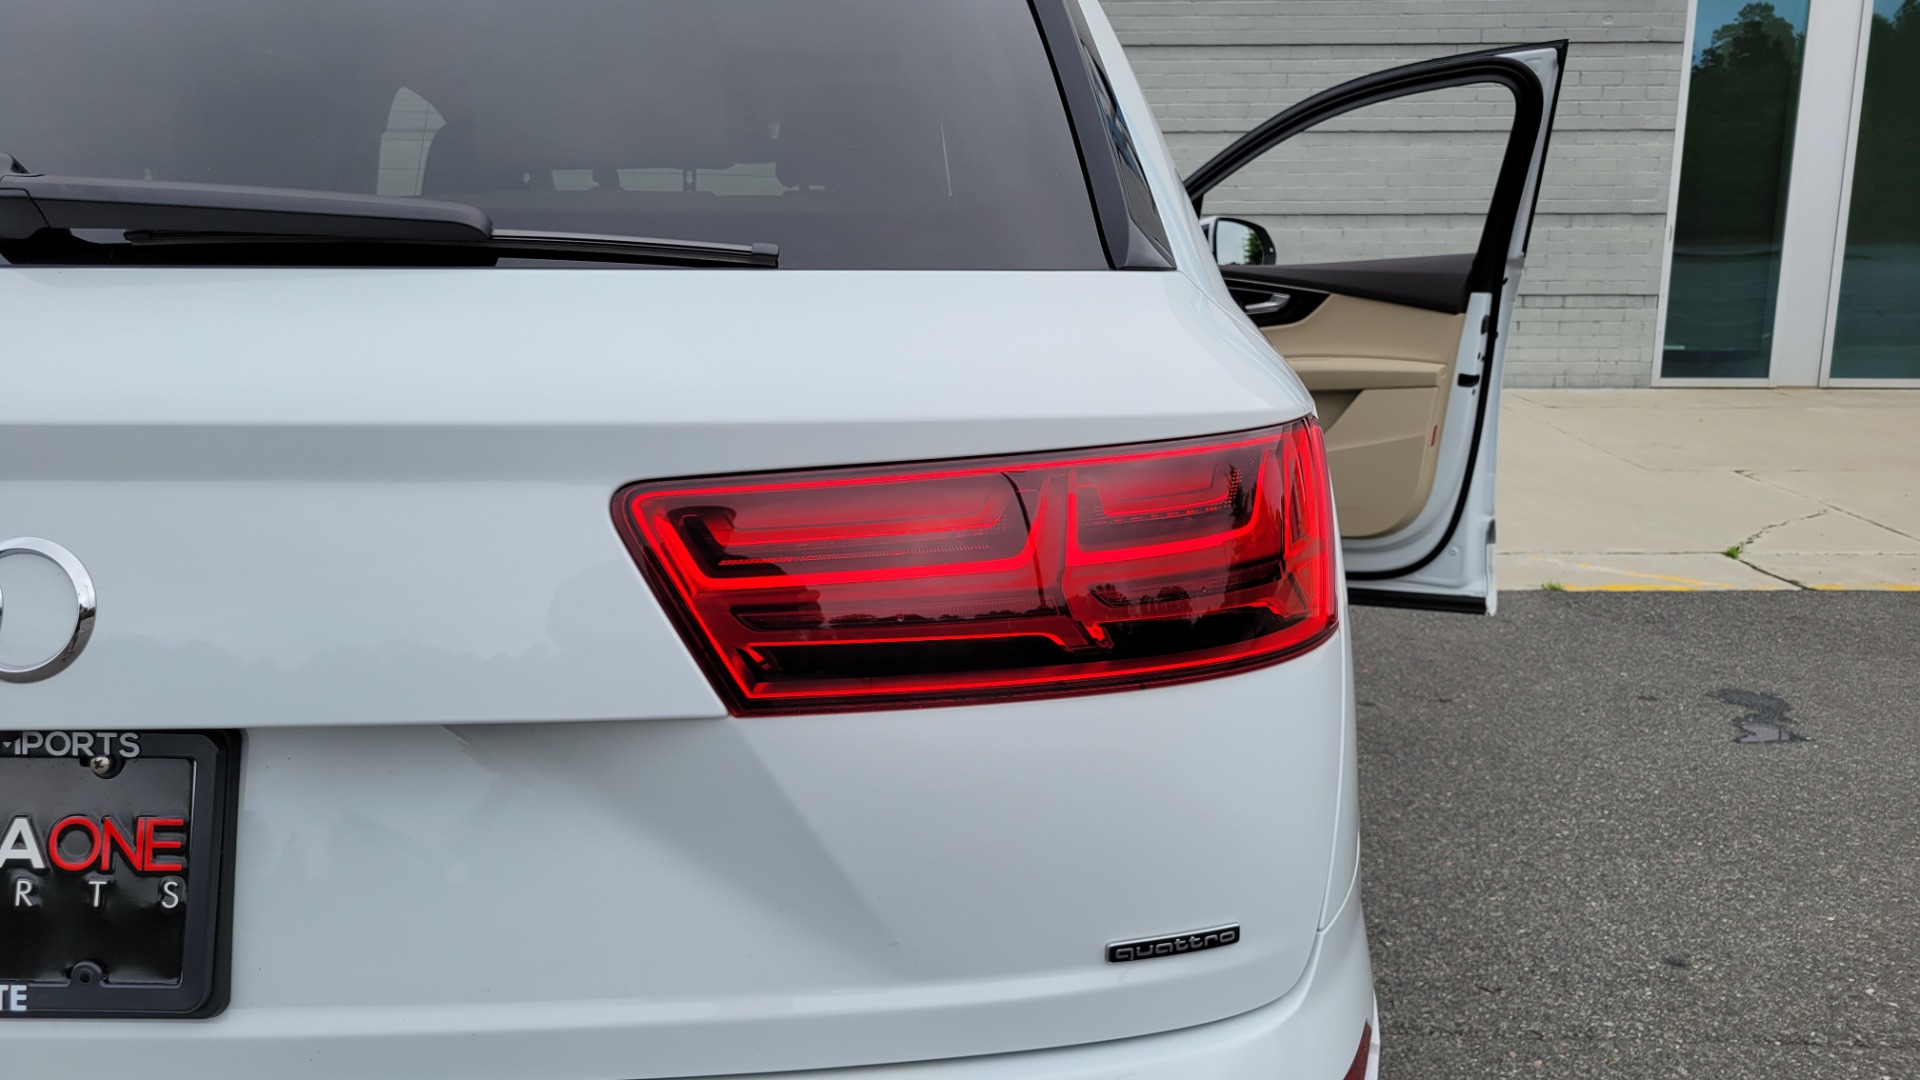 Used 2019 Audi Q7 PRESTIGE / CONV PKG / BOSE / HUD / CLD WTHR / TOWING / REARVIEW for sale $50,295 at Formula Imports in Charlotte NC 28227 36